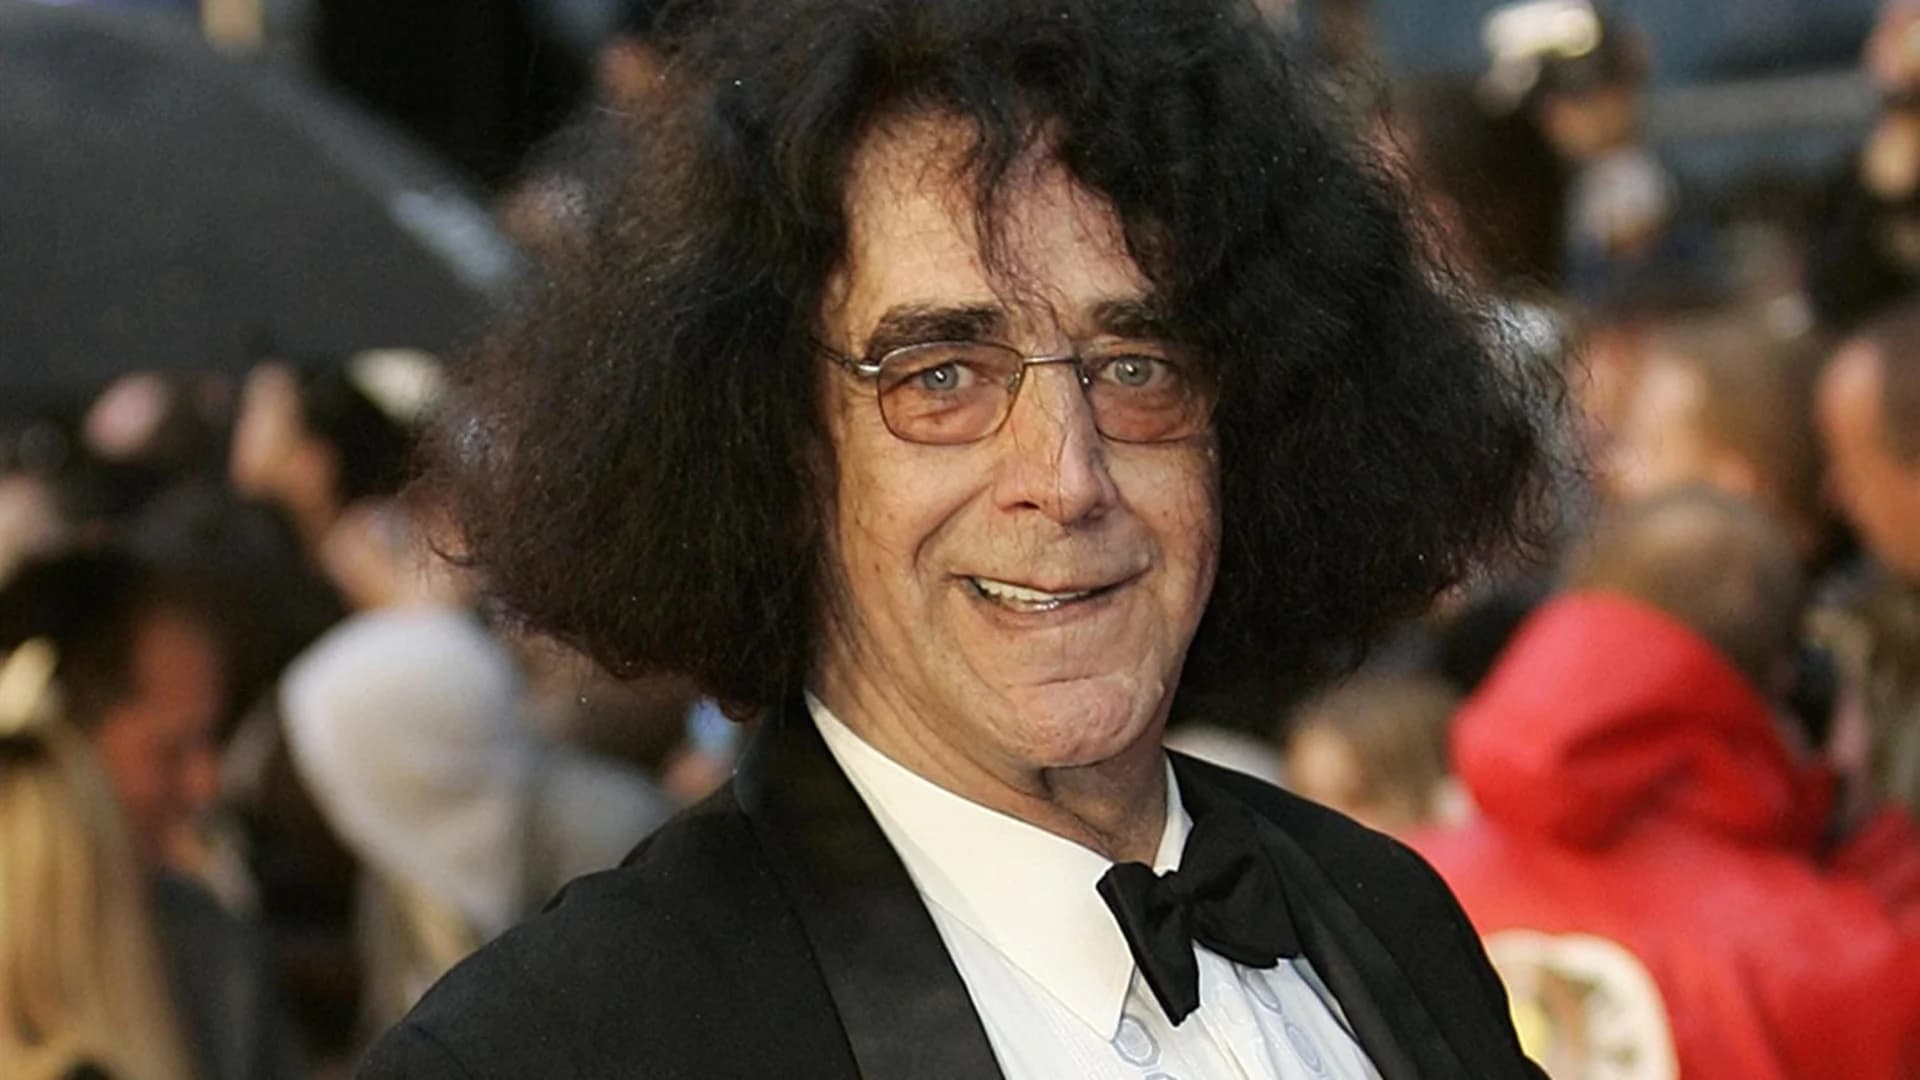 Peter Mayhew, Chewbacca in the 'Star Wars' films, dies at 74